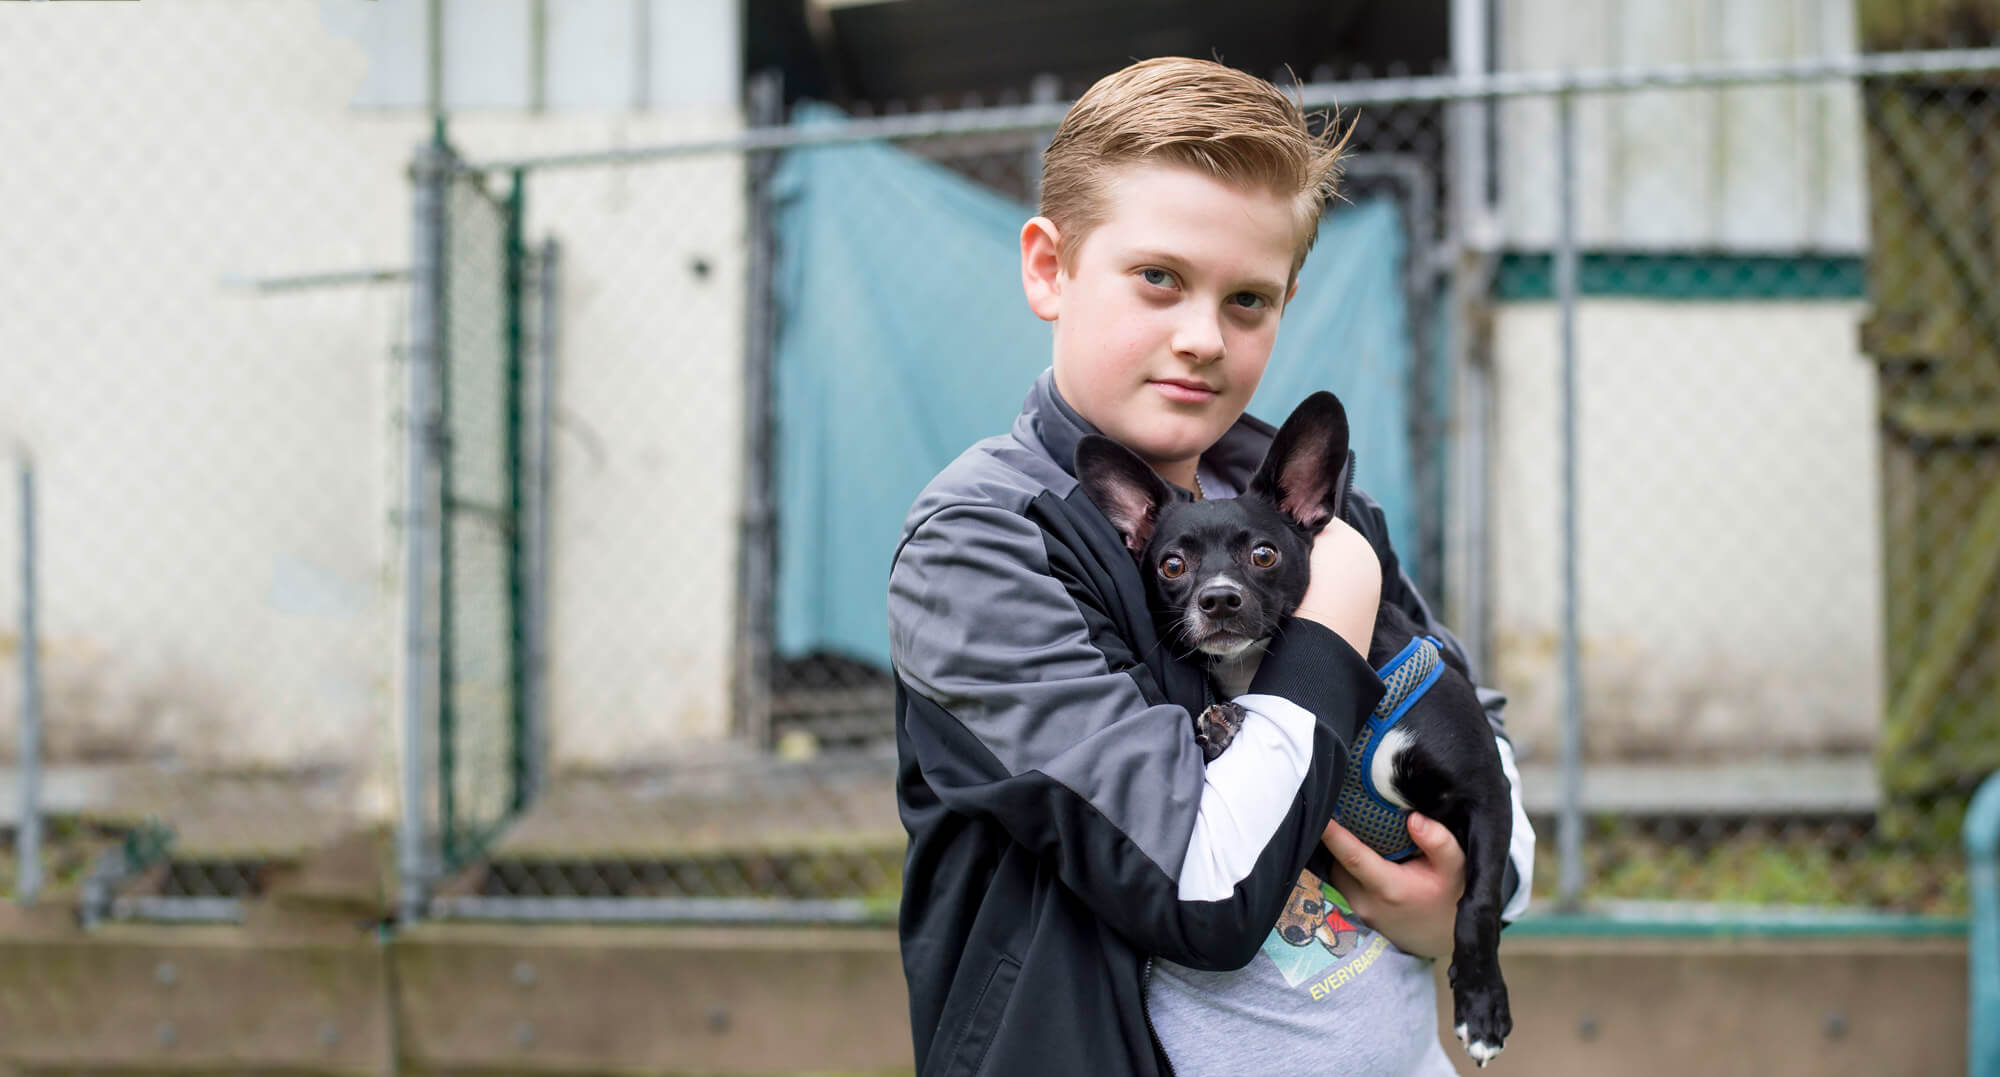 Young boy holding a small black dog